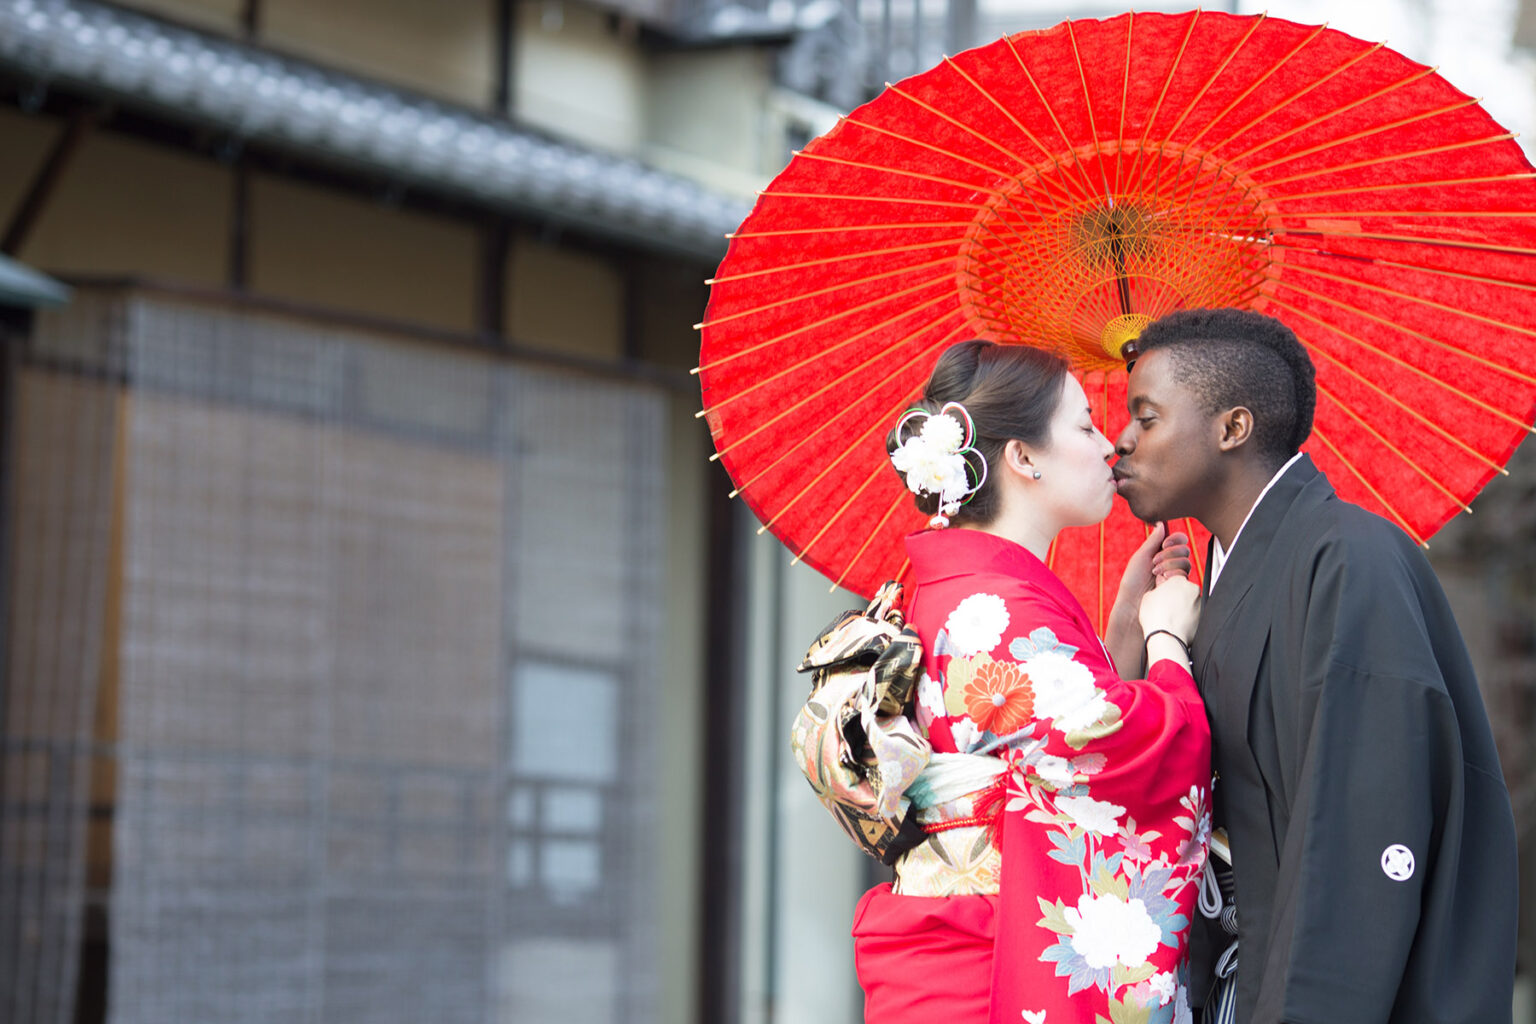 Two people kissing while standing on a red paper umbrella. They're wearing traditional red and black kimonos.